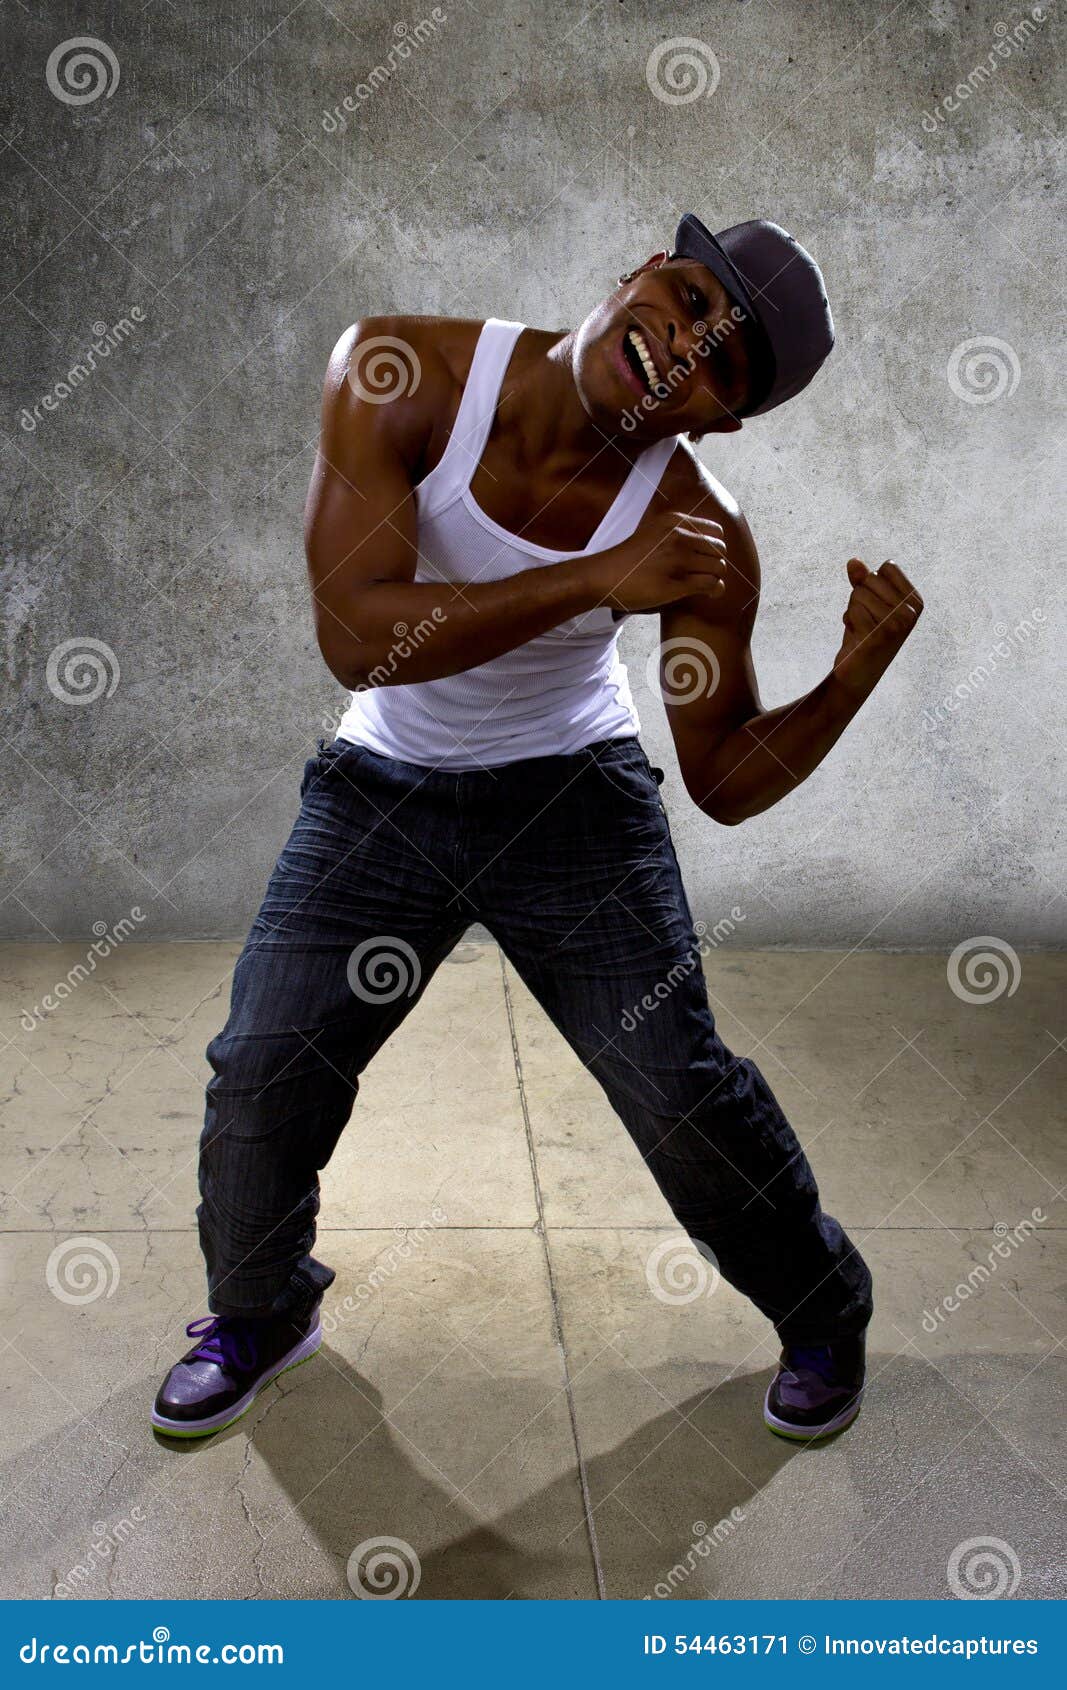 Black Man Performing Hip Hop Dance Choreography Stock Image - Image of  movement, excited: 54463171